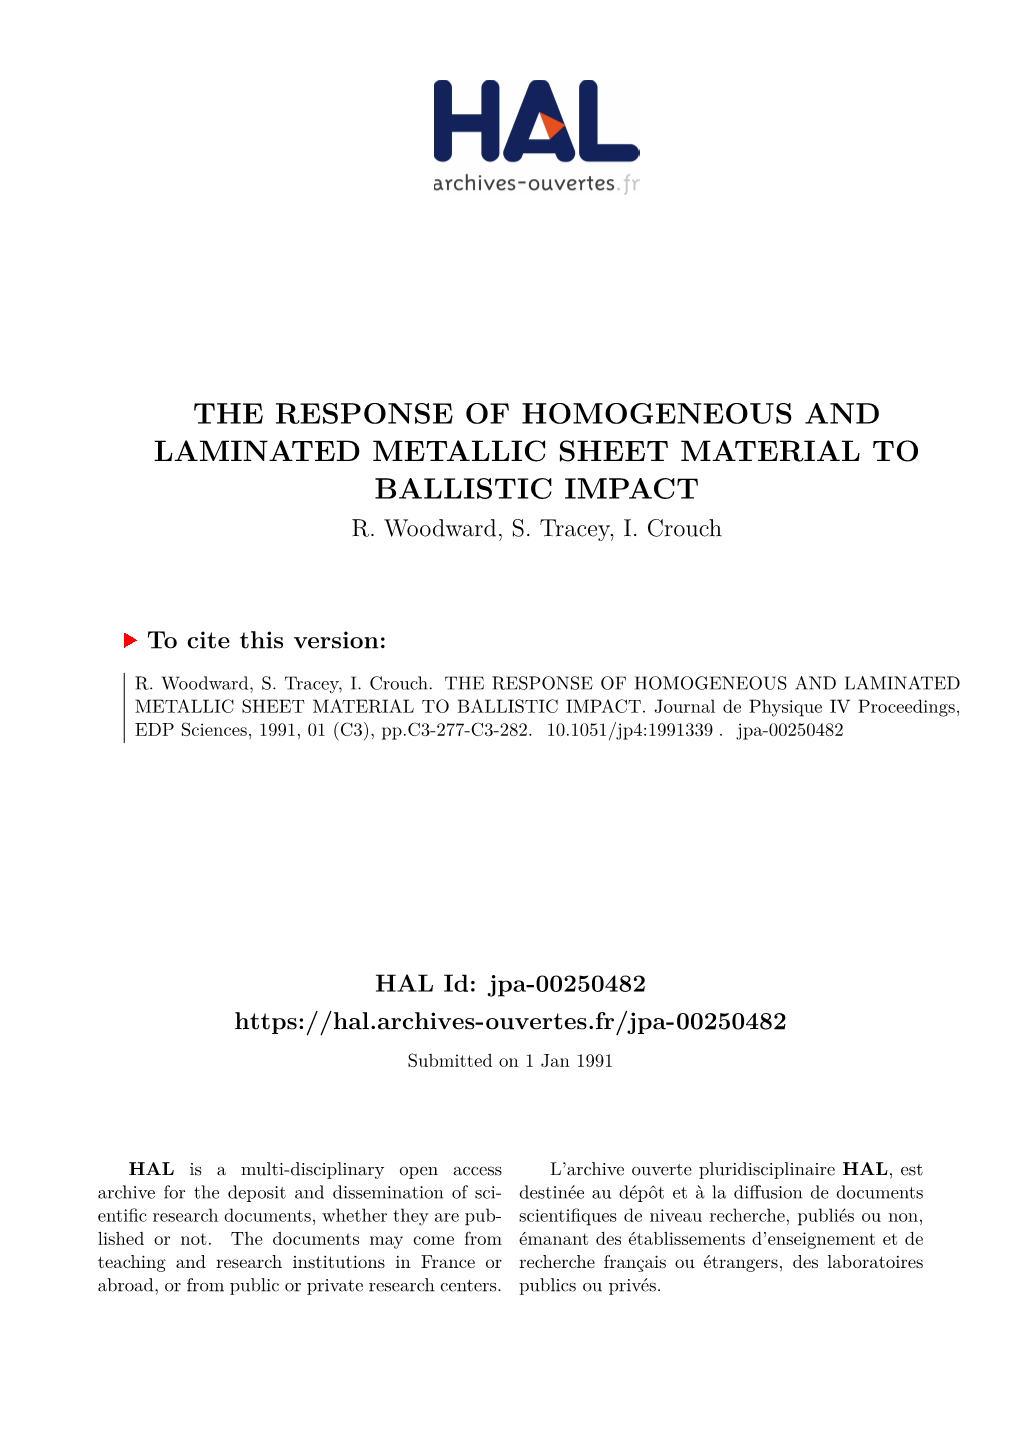 The Response of Homogeneous and Laminated Metallic Sheet Material to Ballistic Impact R